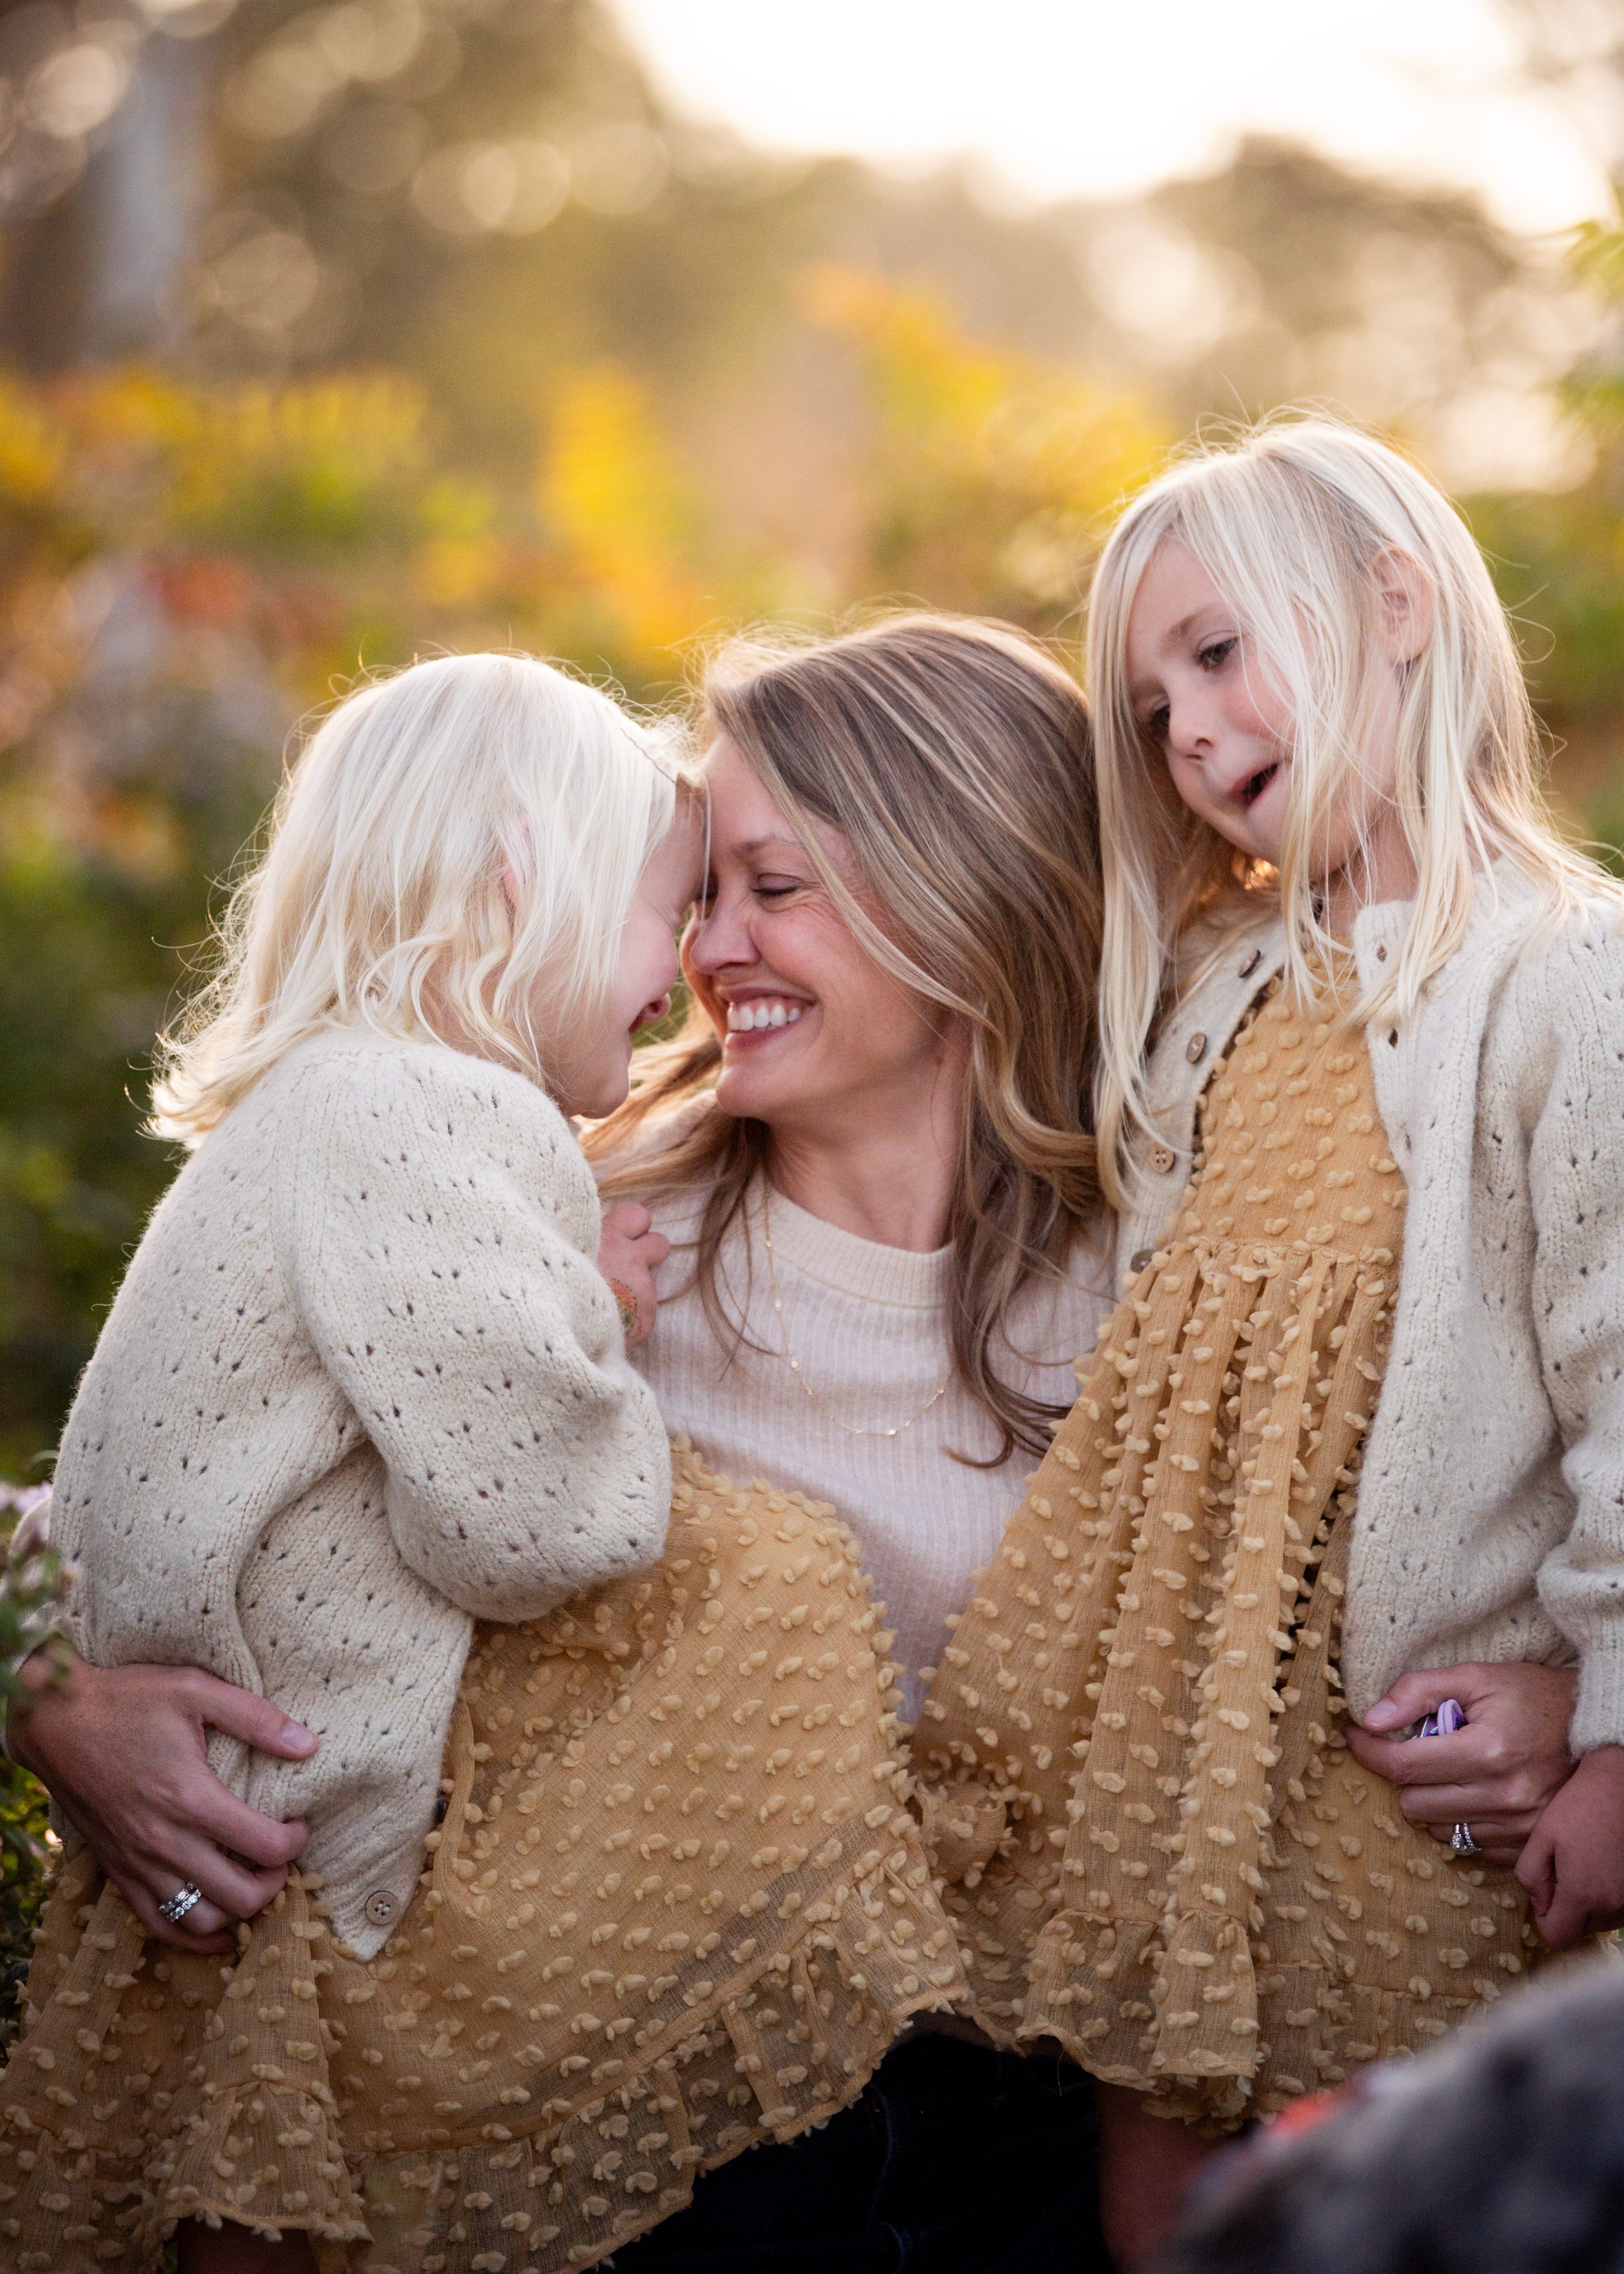 lindsay murphy photography | portland maine family photographer | cape elizabeth mom and daughters candid.jpg